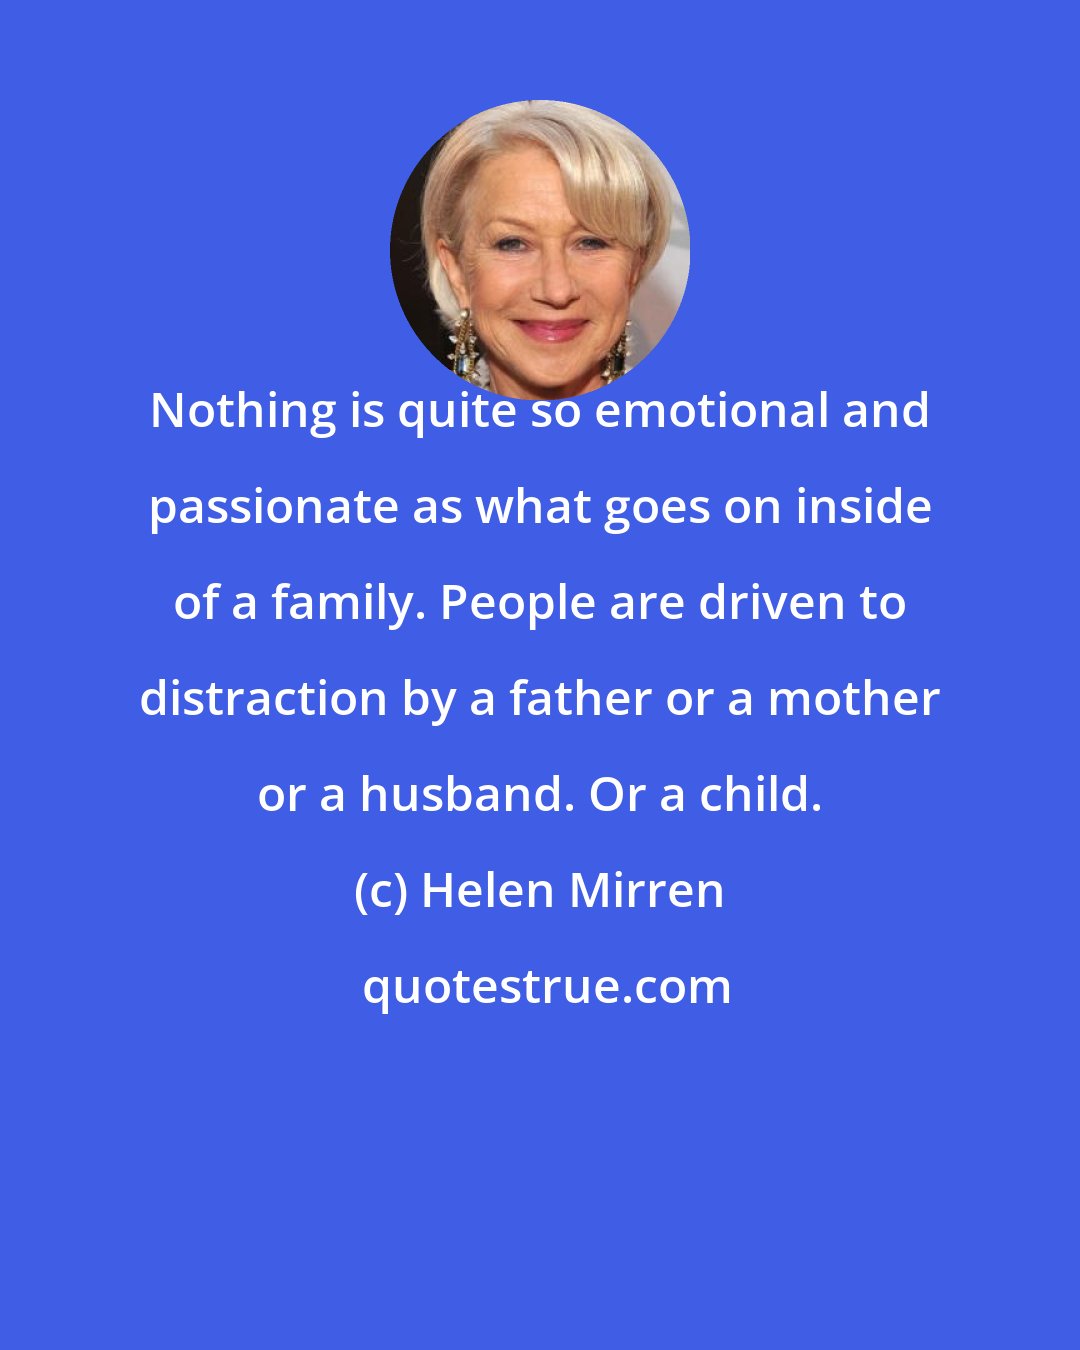 Helen Mirren: Nothing is quite so emotional and passionate as what goes on inside of a family. People are driven to distraction by a father or a mother or a husband. Or a child.